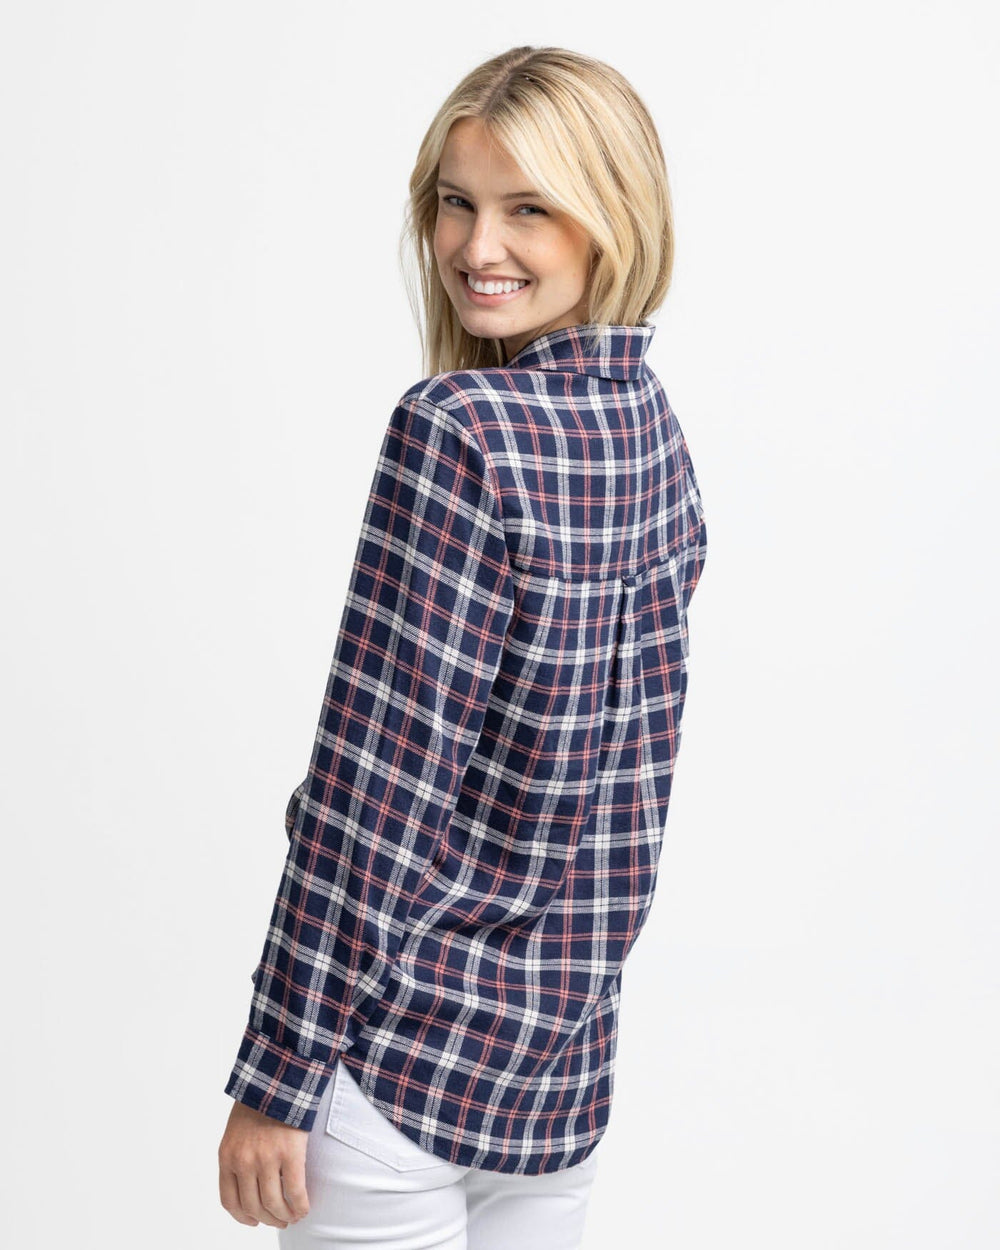 The back view of the Southern Tide Niki Chilly Morning Plaid Shirt by Southern Tide - Nautical Navy